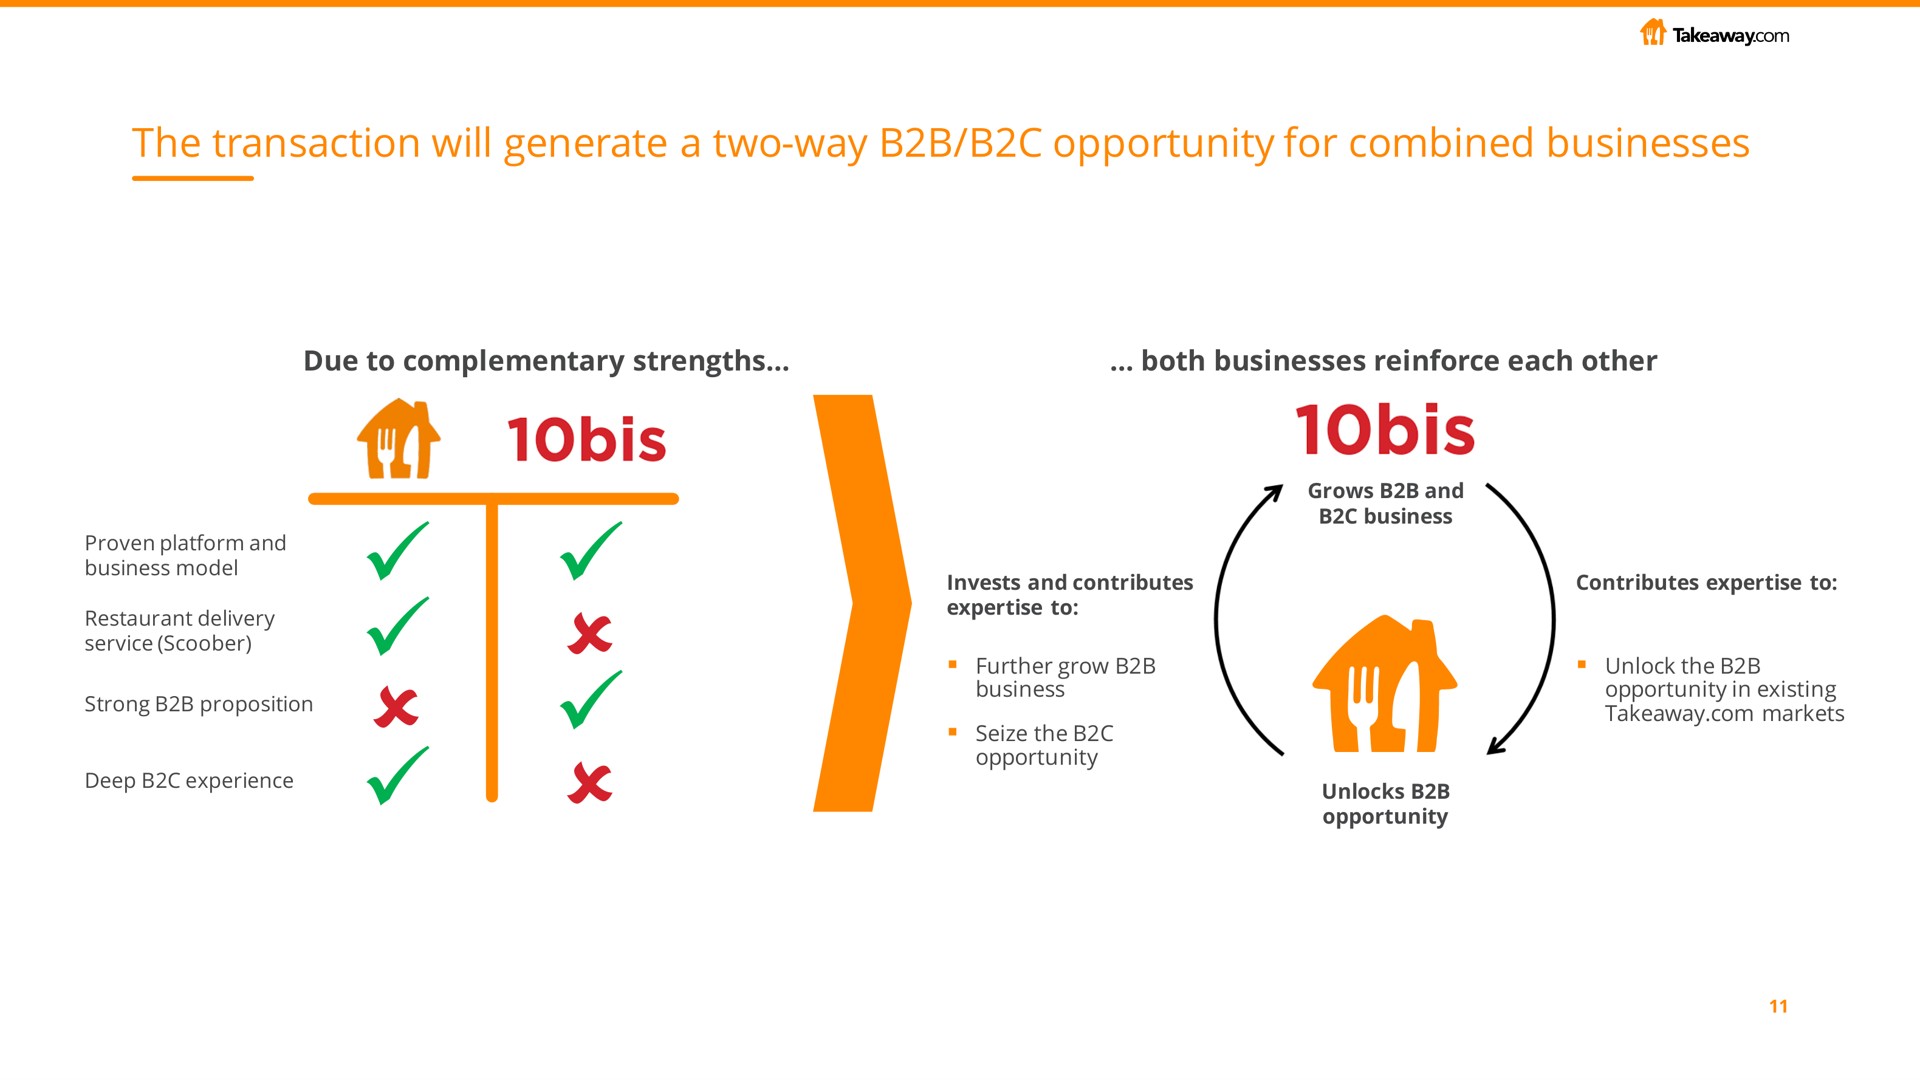 the transaction will generate a two way opportunity for combined businesses bis bis | Just Eat Takeaway.com